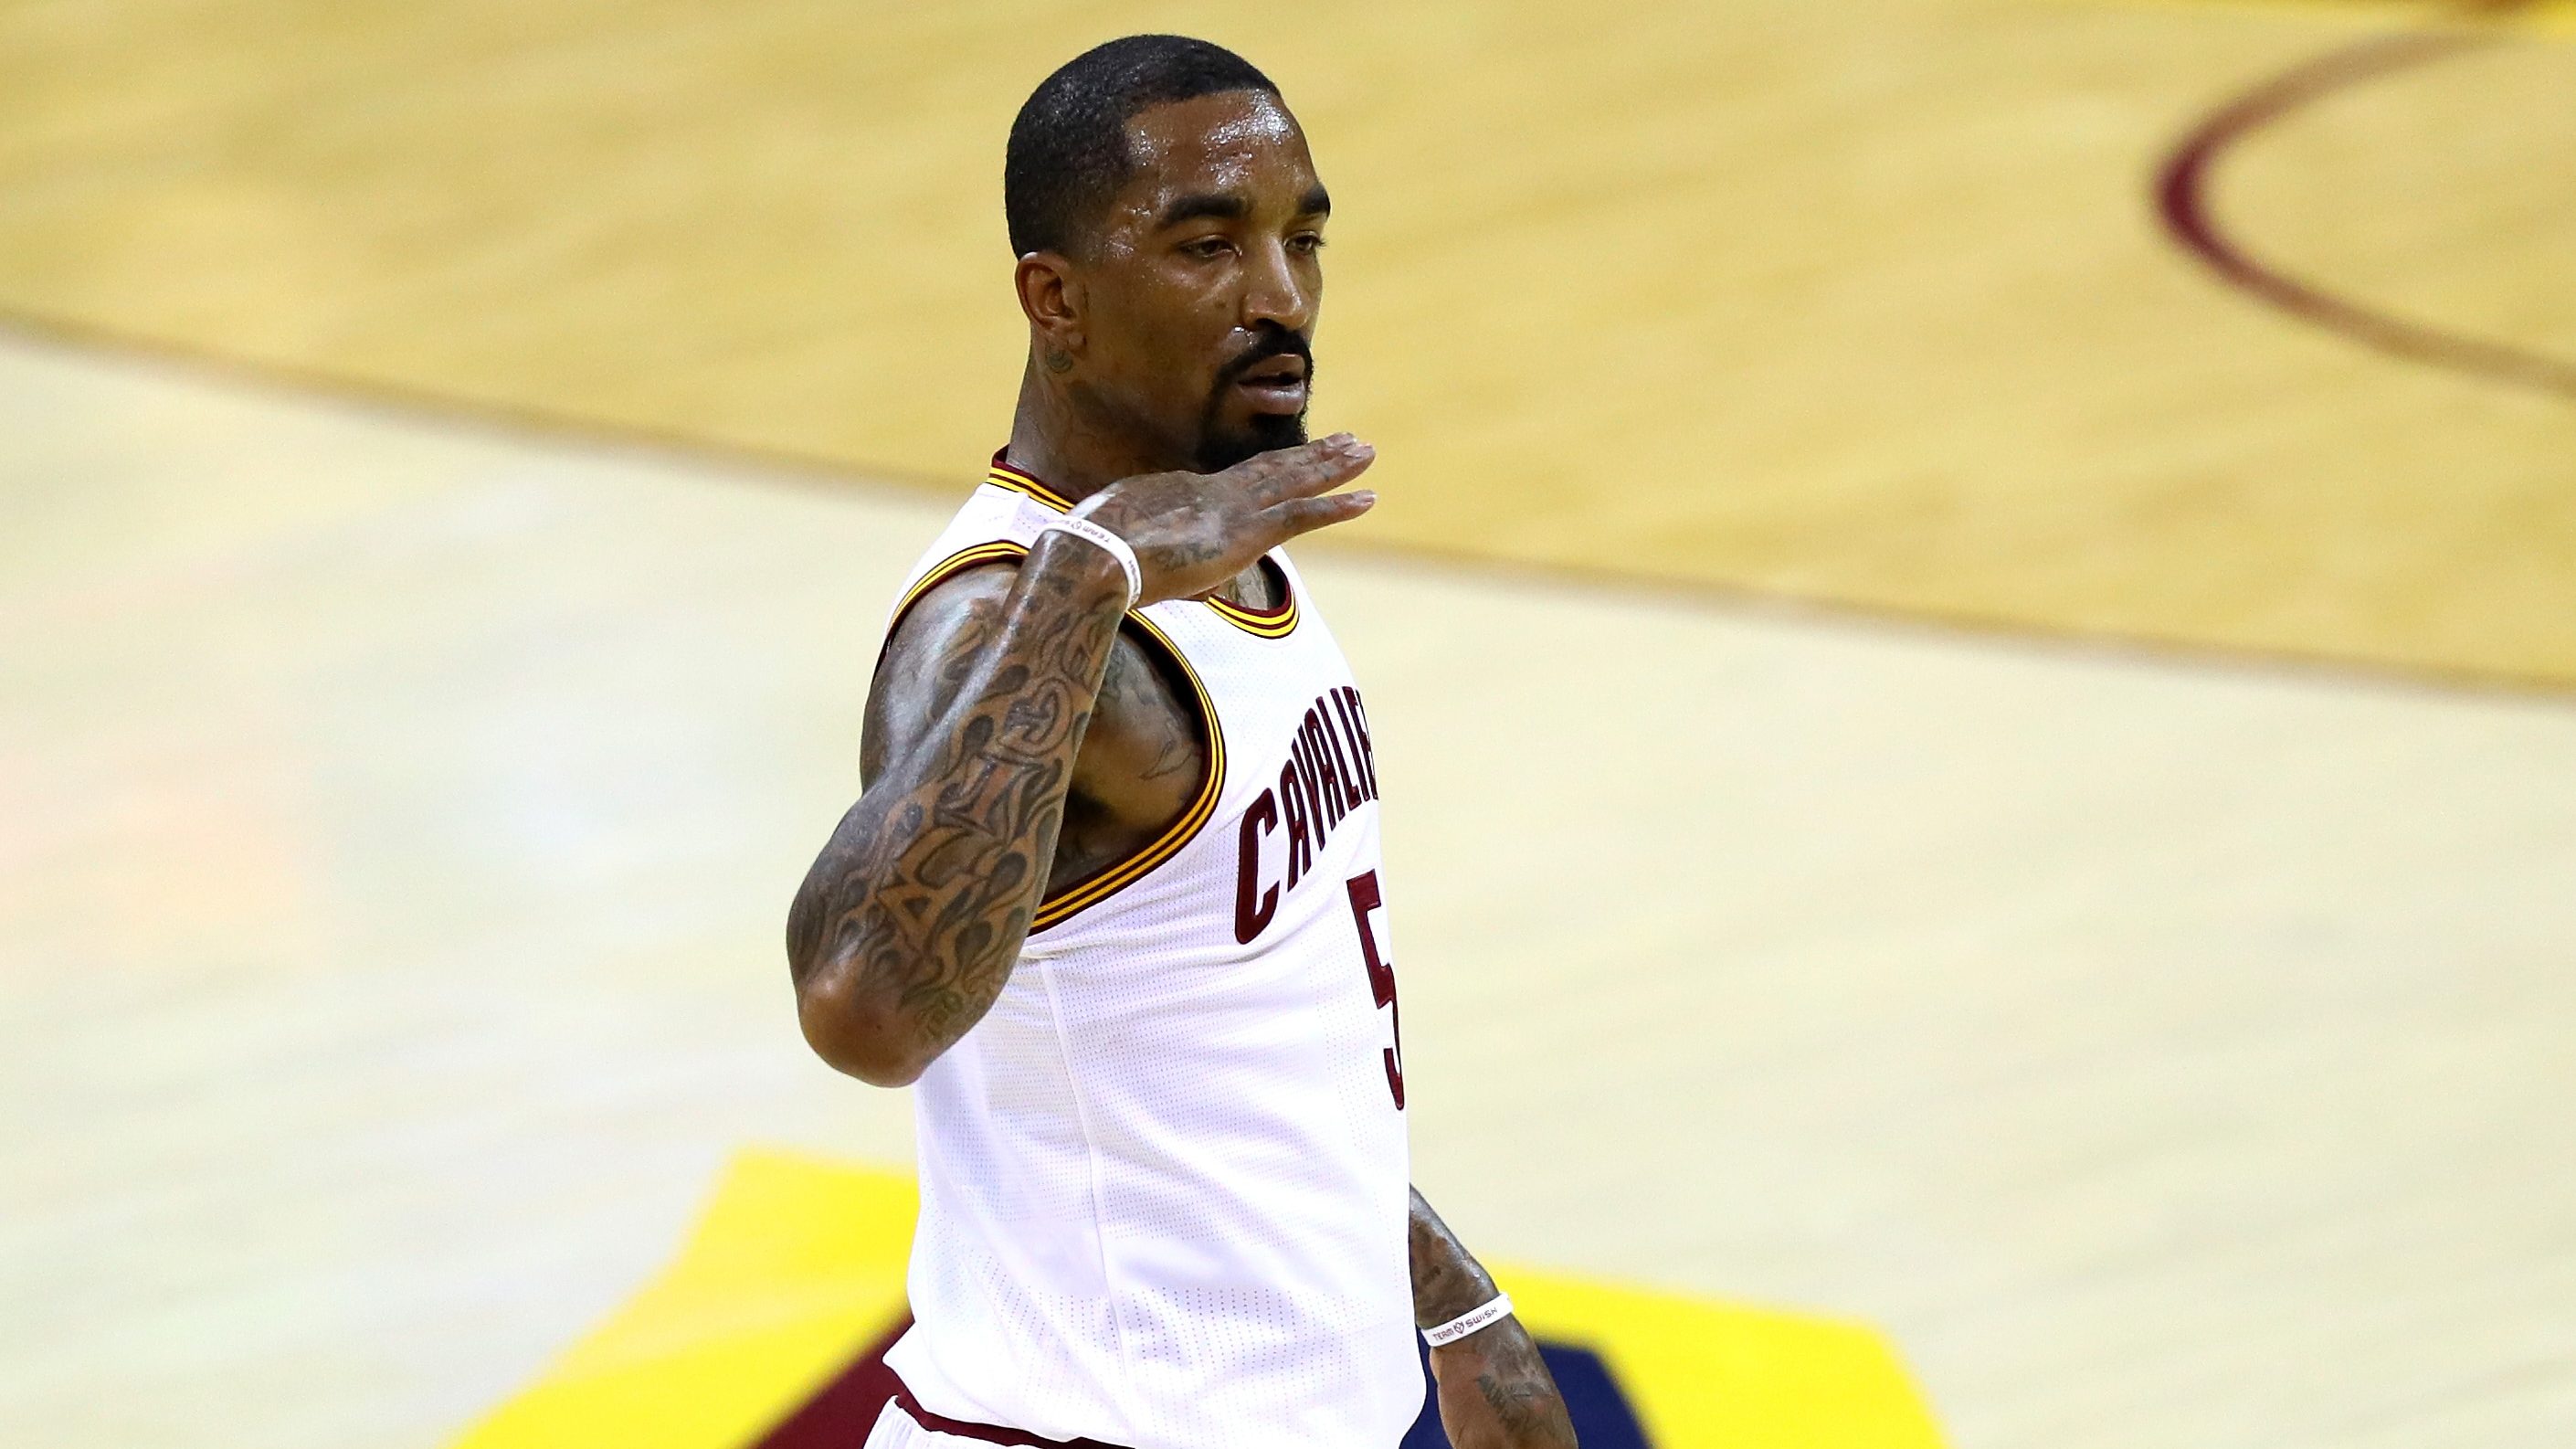 Lakers Sign JR Smith